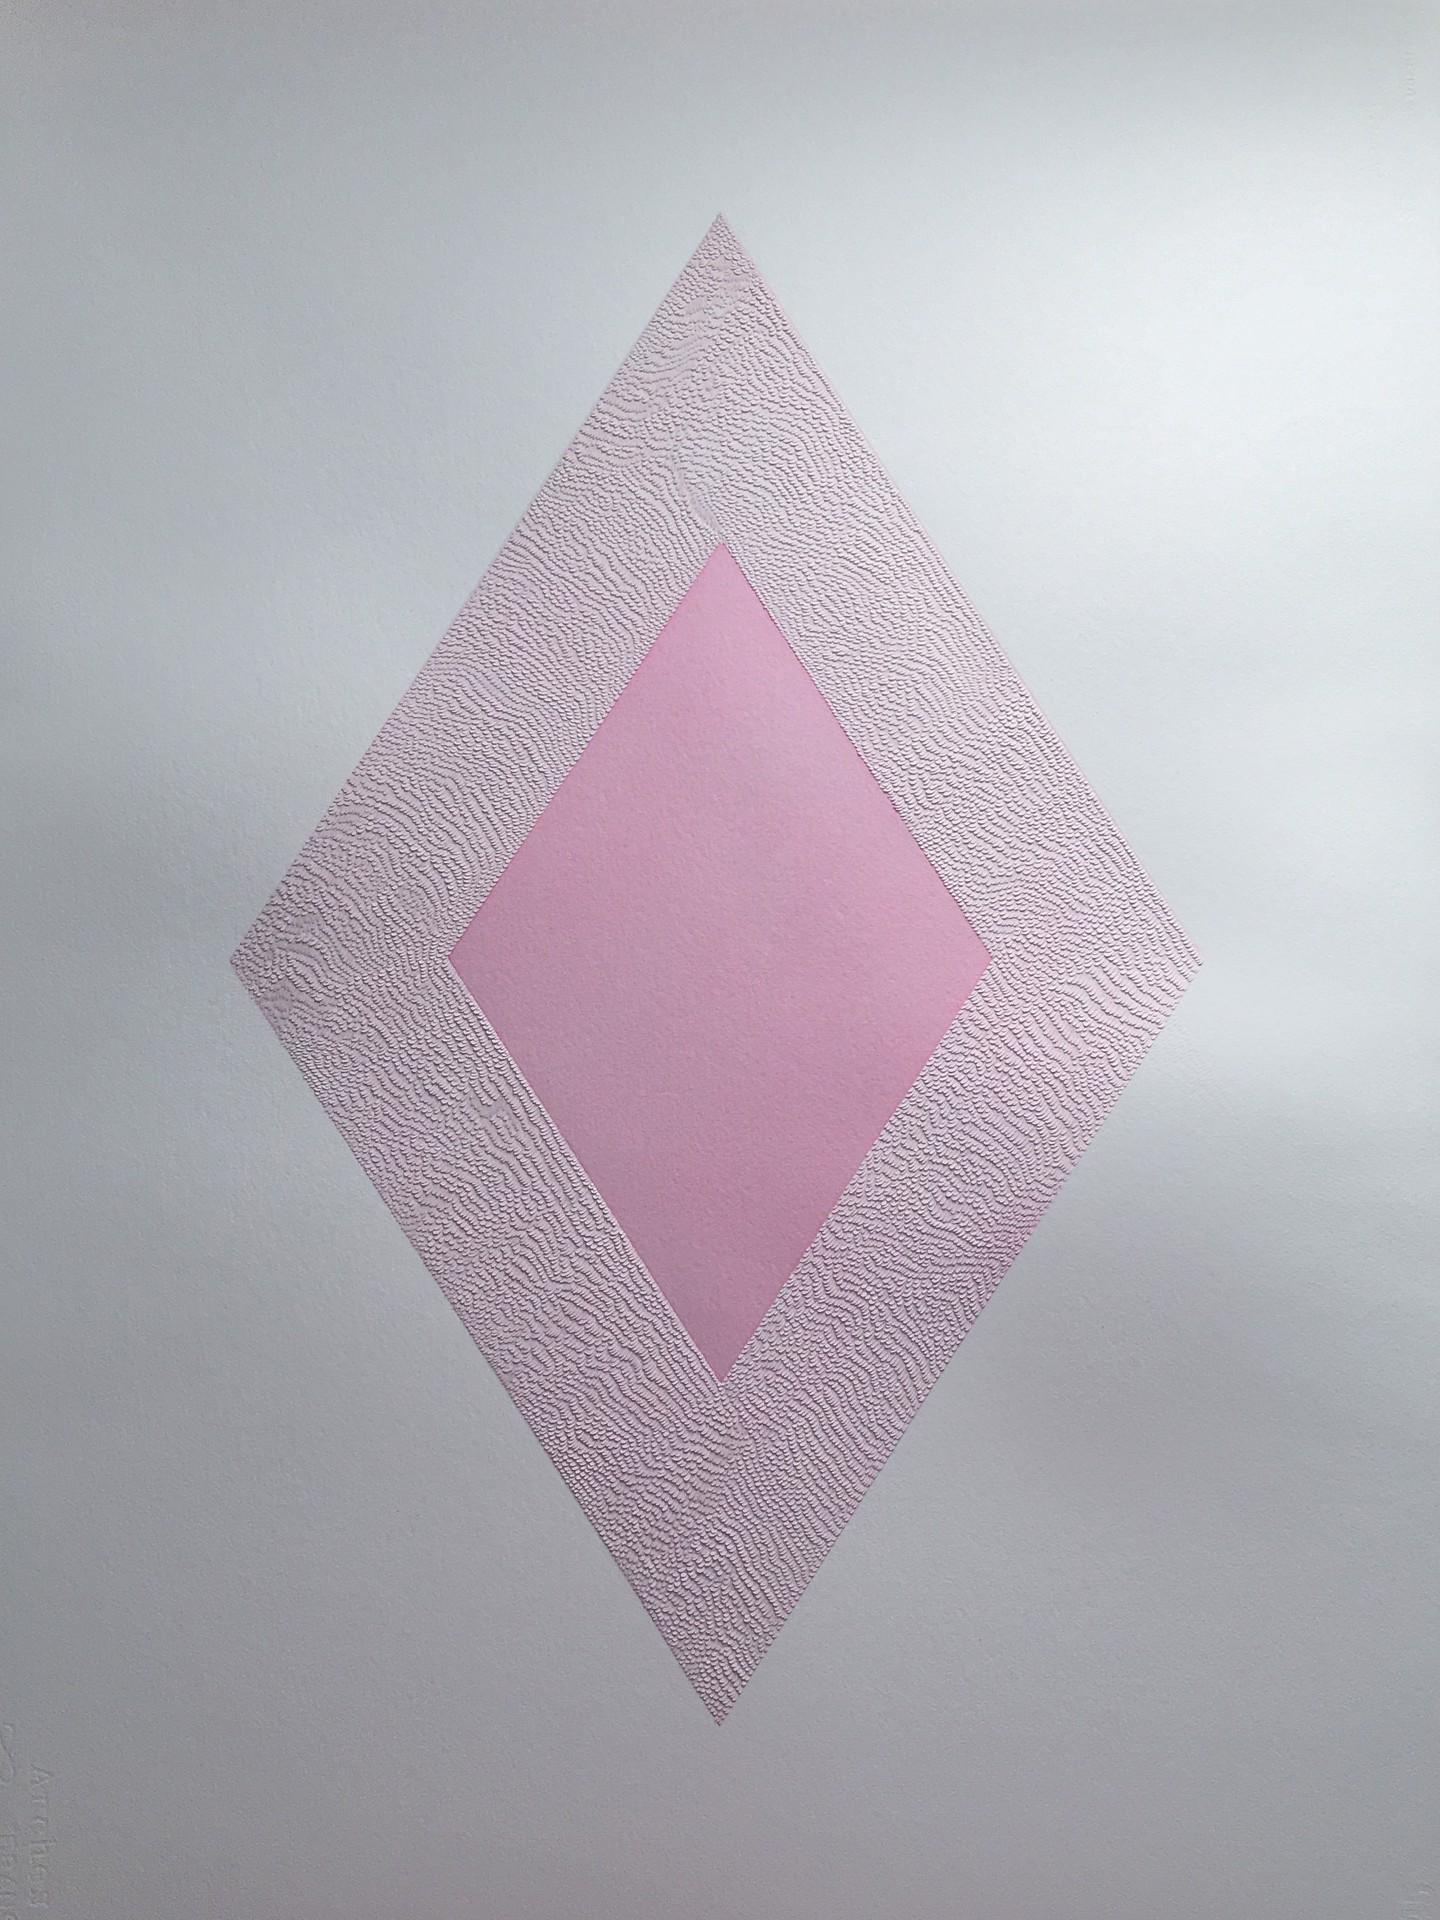 Knife Drawing XXVIII - Manipulated Textured Paper with Stunning Detail (Pink)